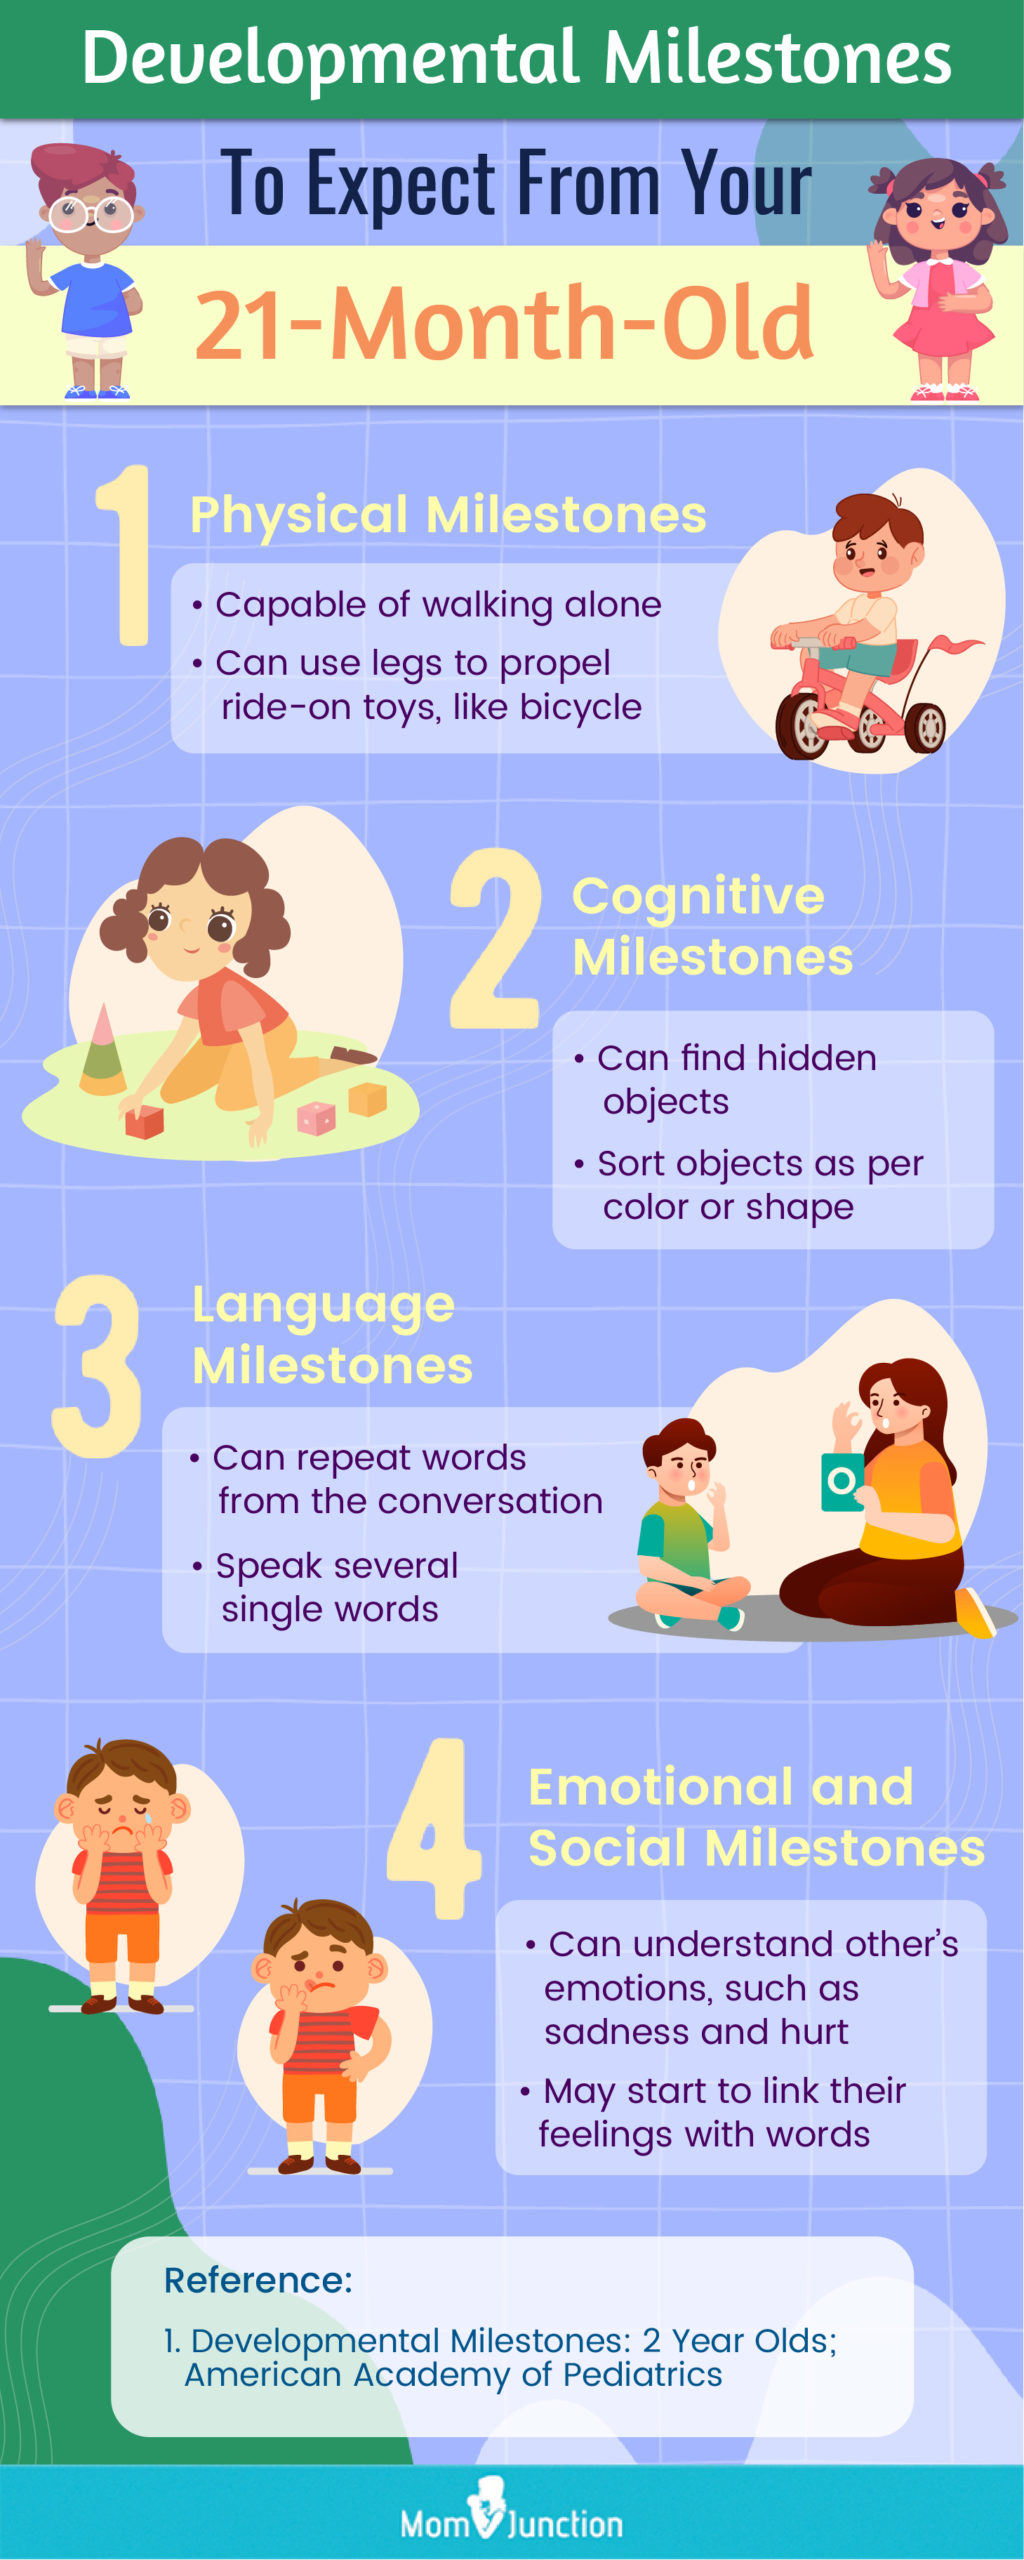 developmental milestones to expect from your 21 month old (infographic)